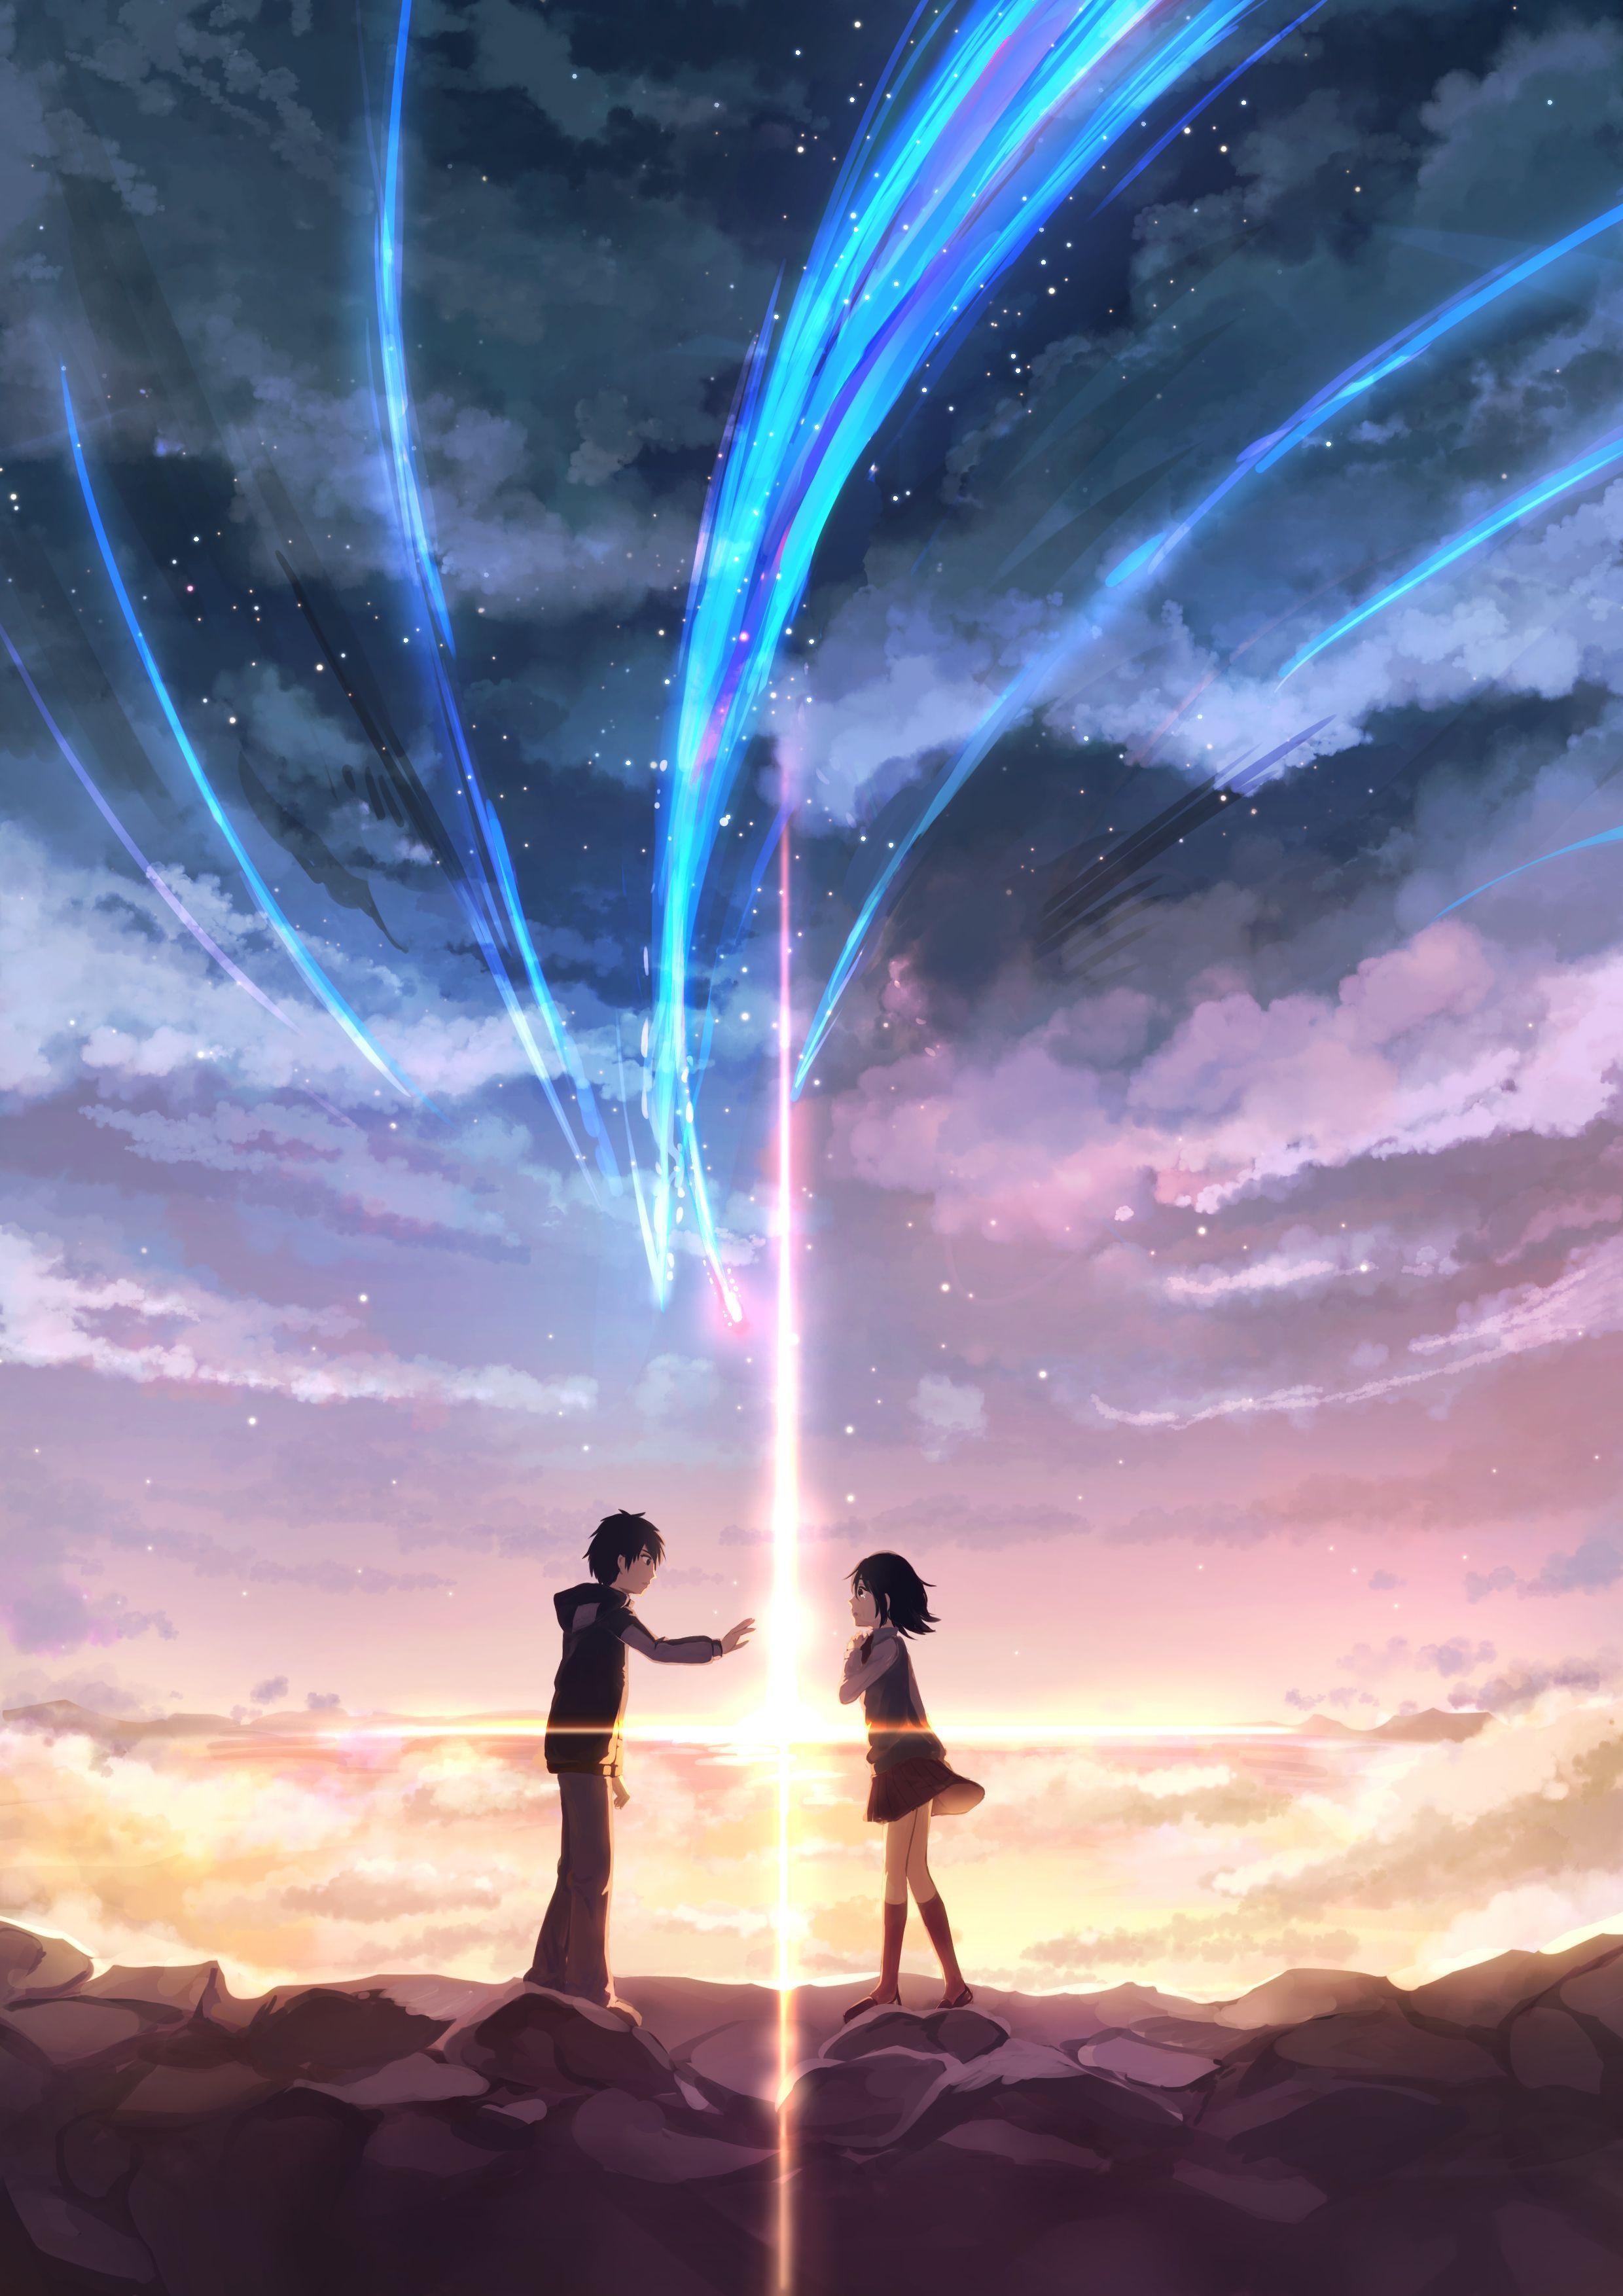 Your Name Anime Gif Wallpapers Iphone